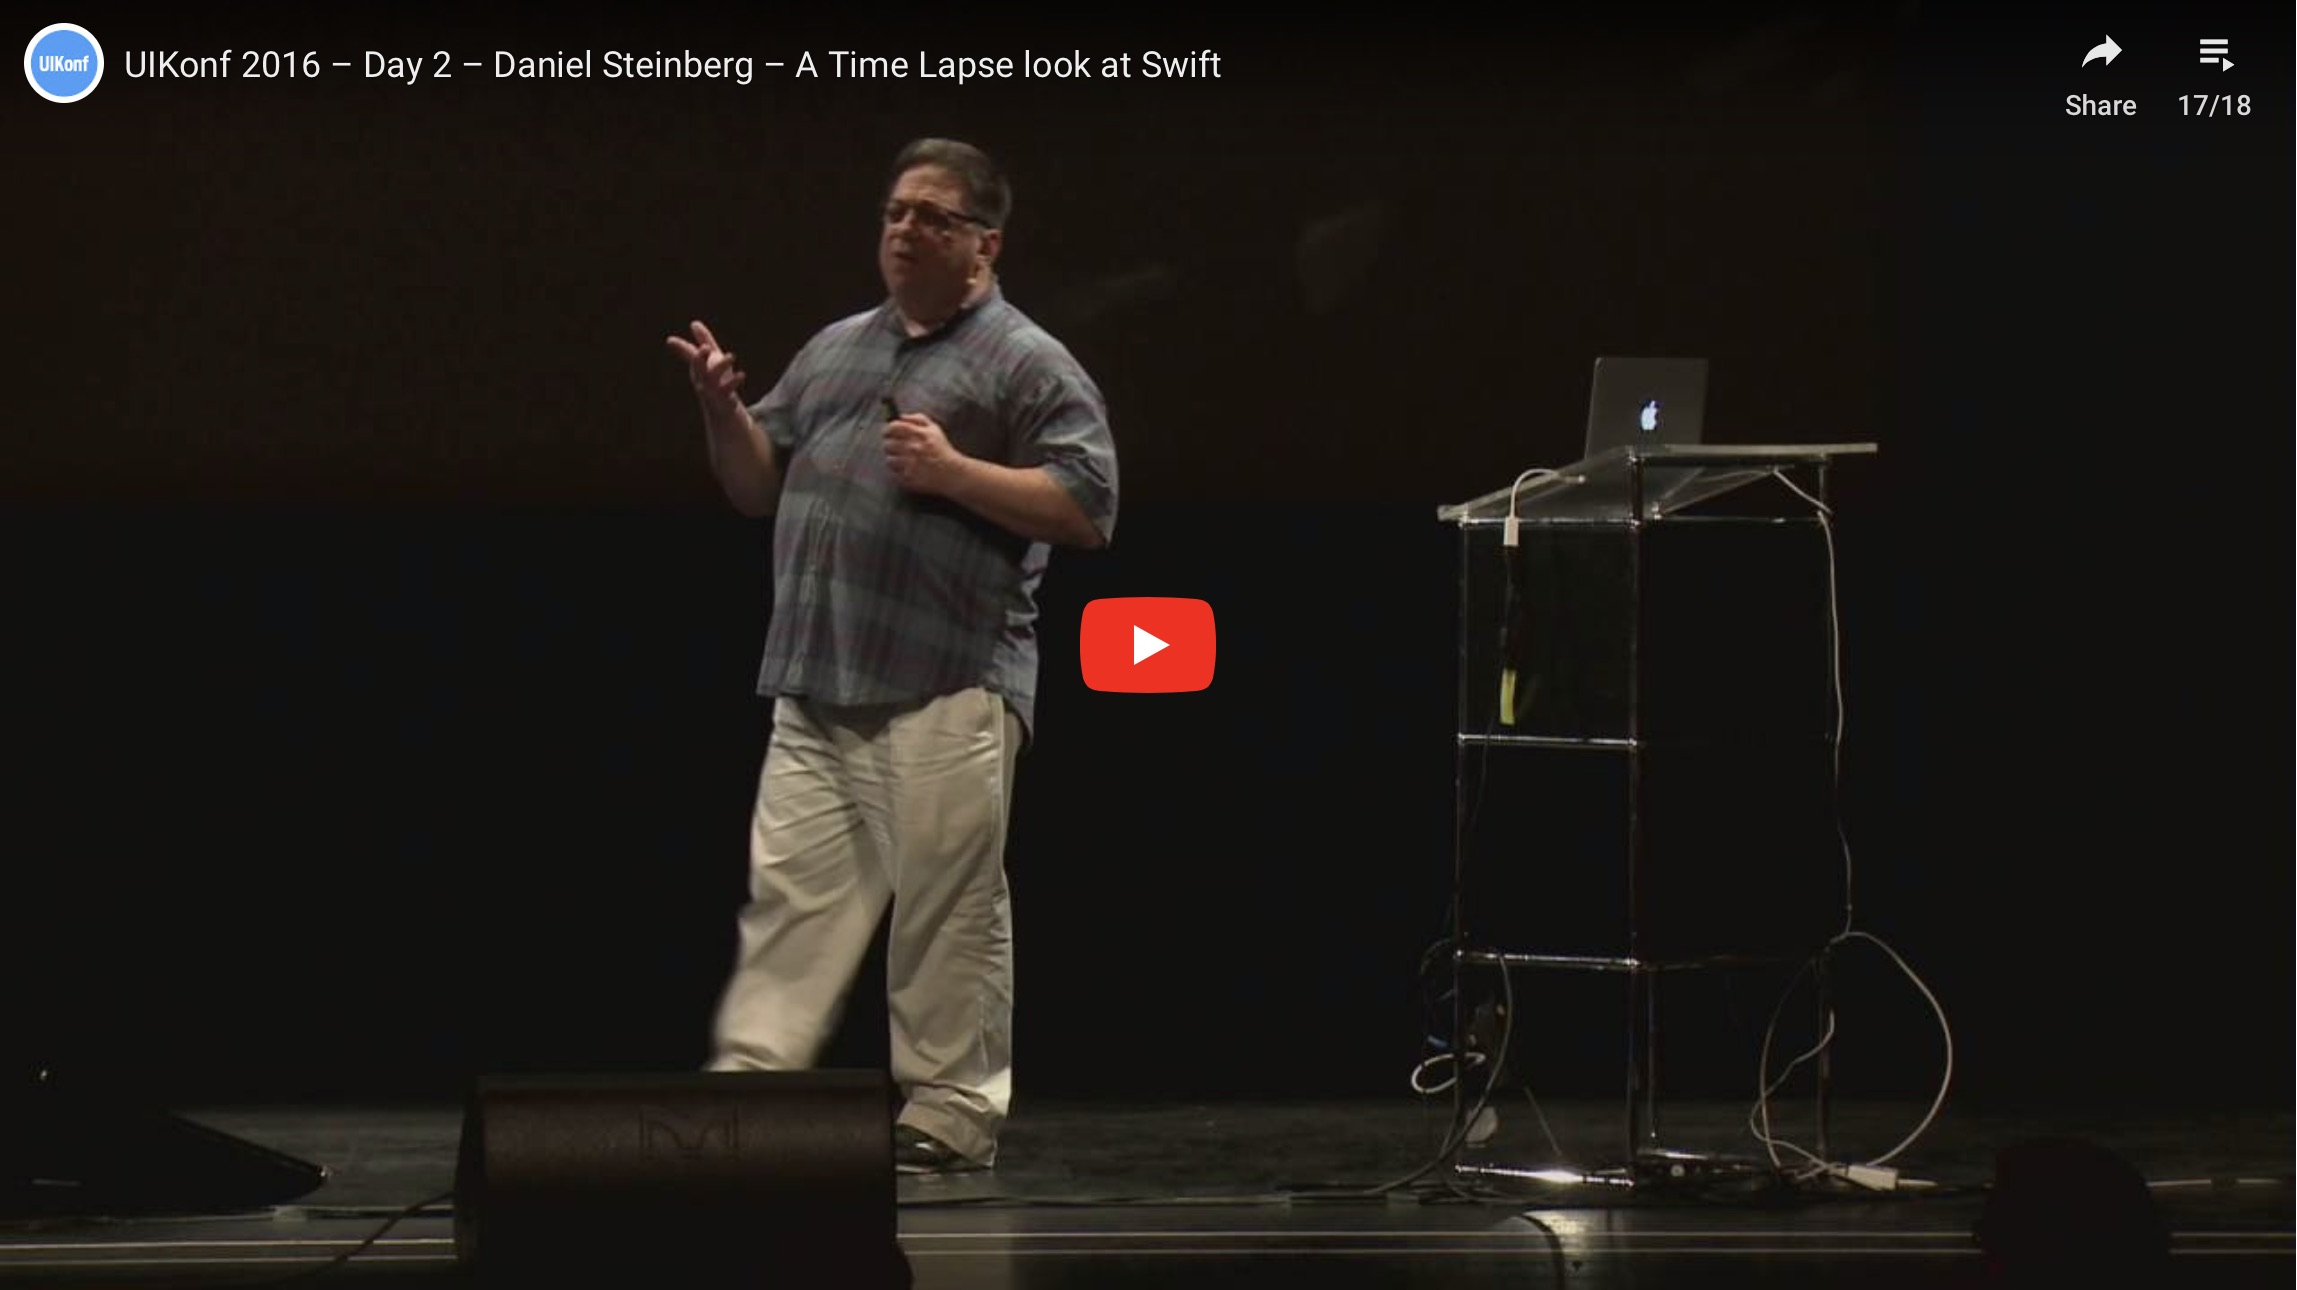 Preview of YouTube video: Daniel Steinberg, A Time Laps Look at Swift